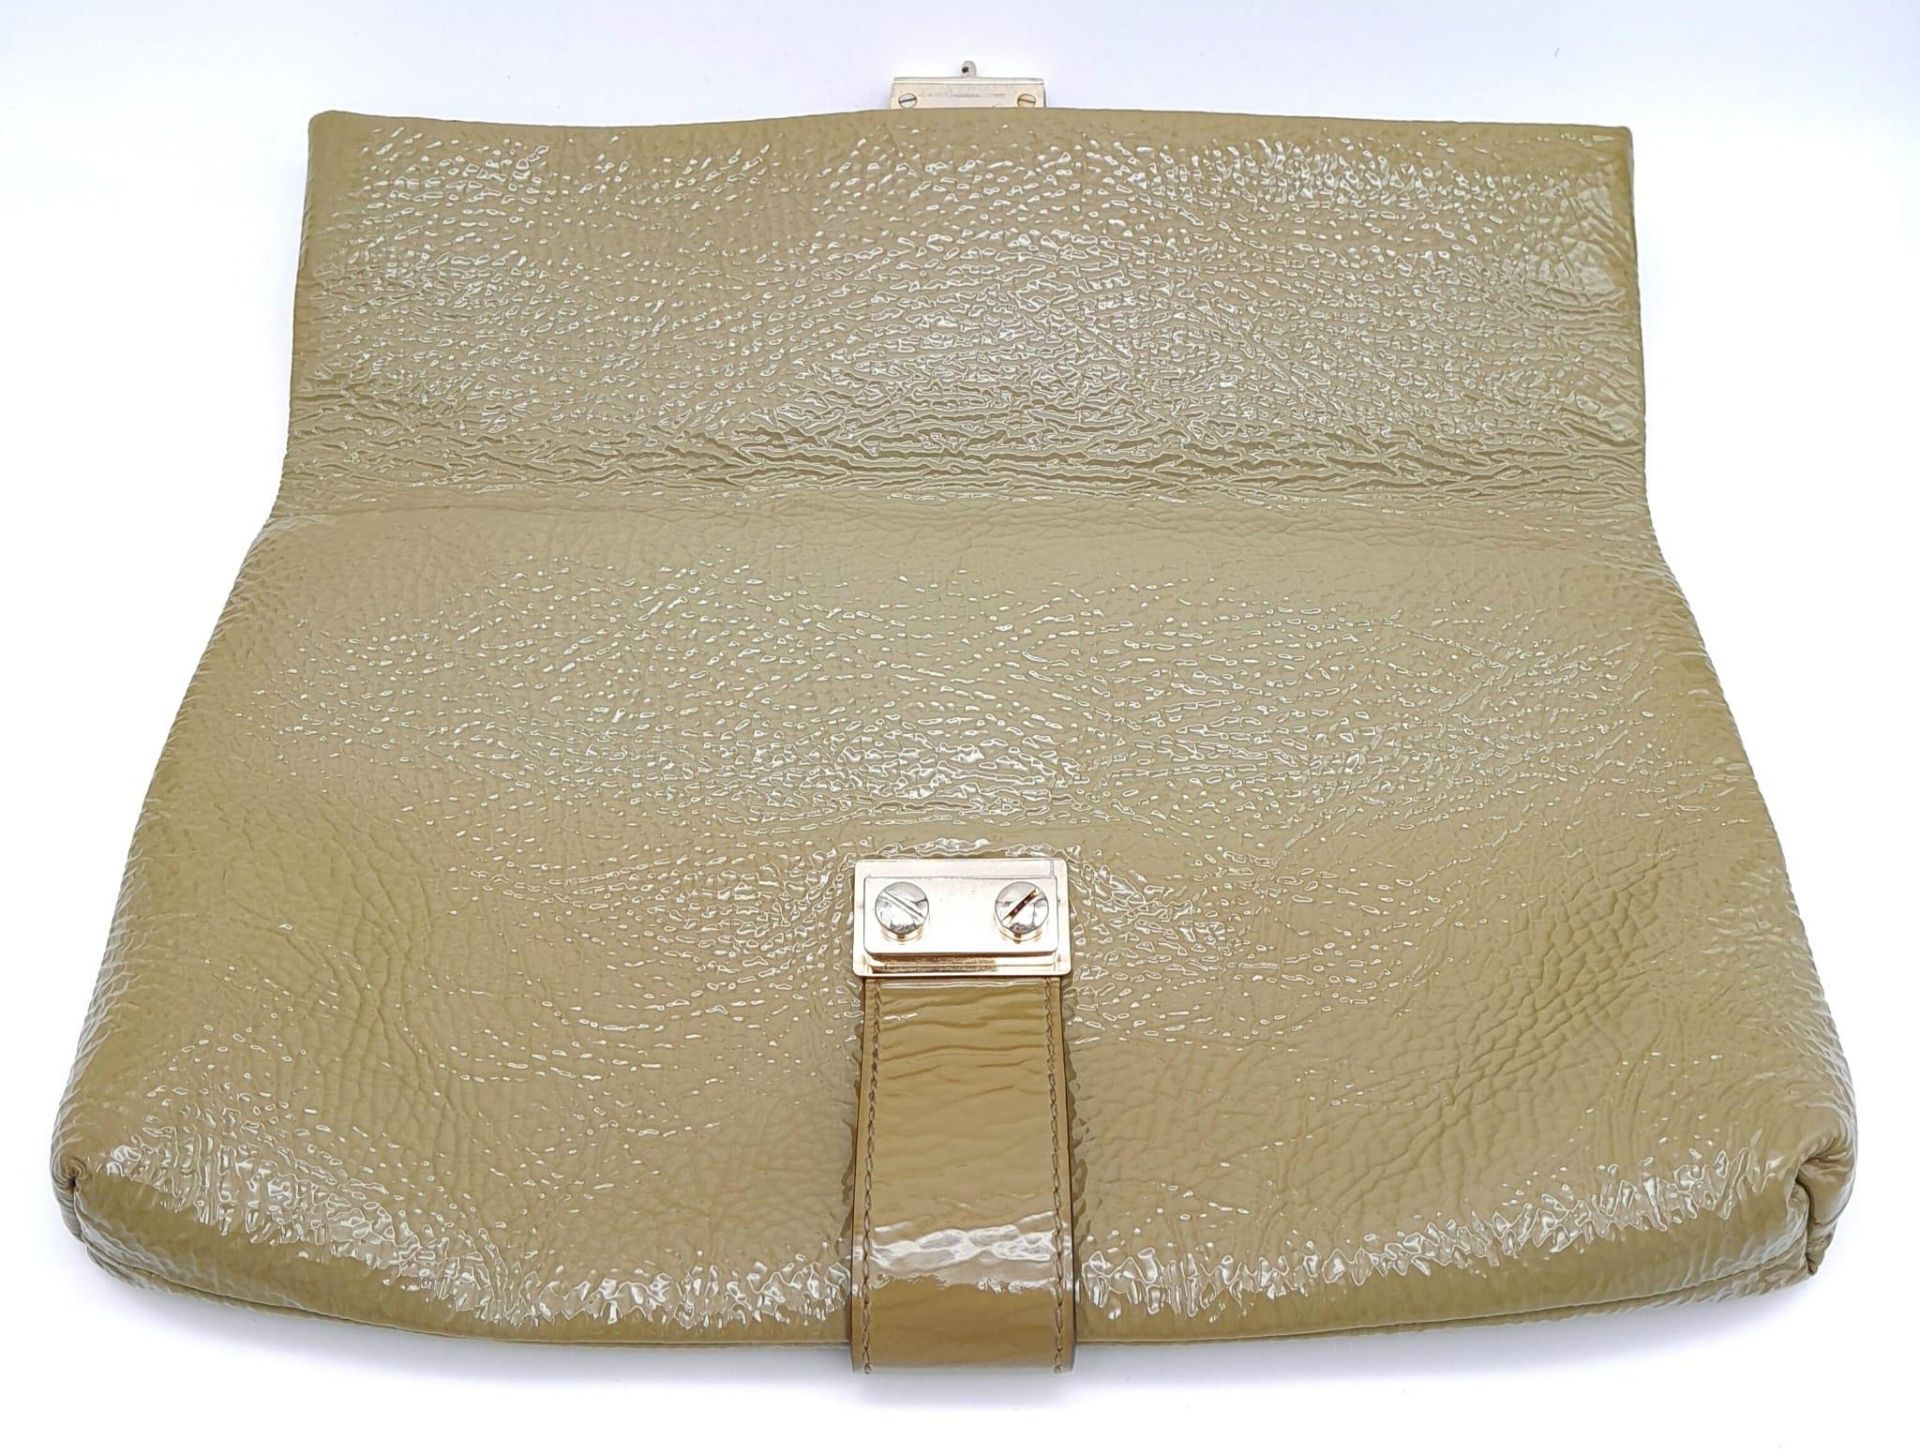 A Mulberry Harriet Khaki Leather Clutch Bag. Spongy patent leather exterior with gold-tone hardware, - Image 6 of 10